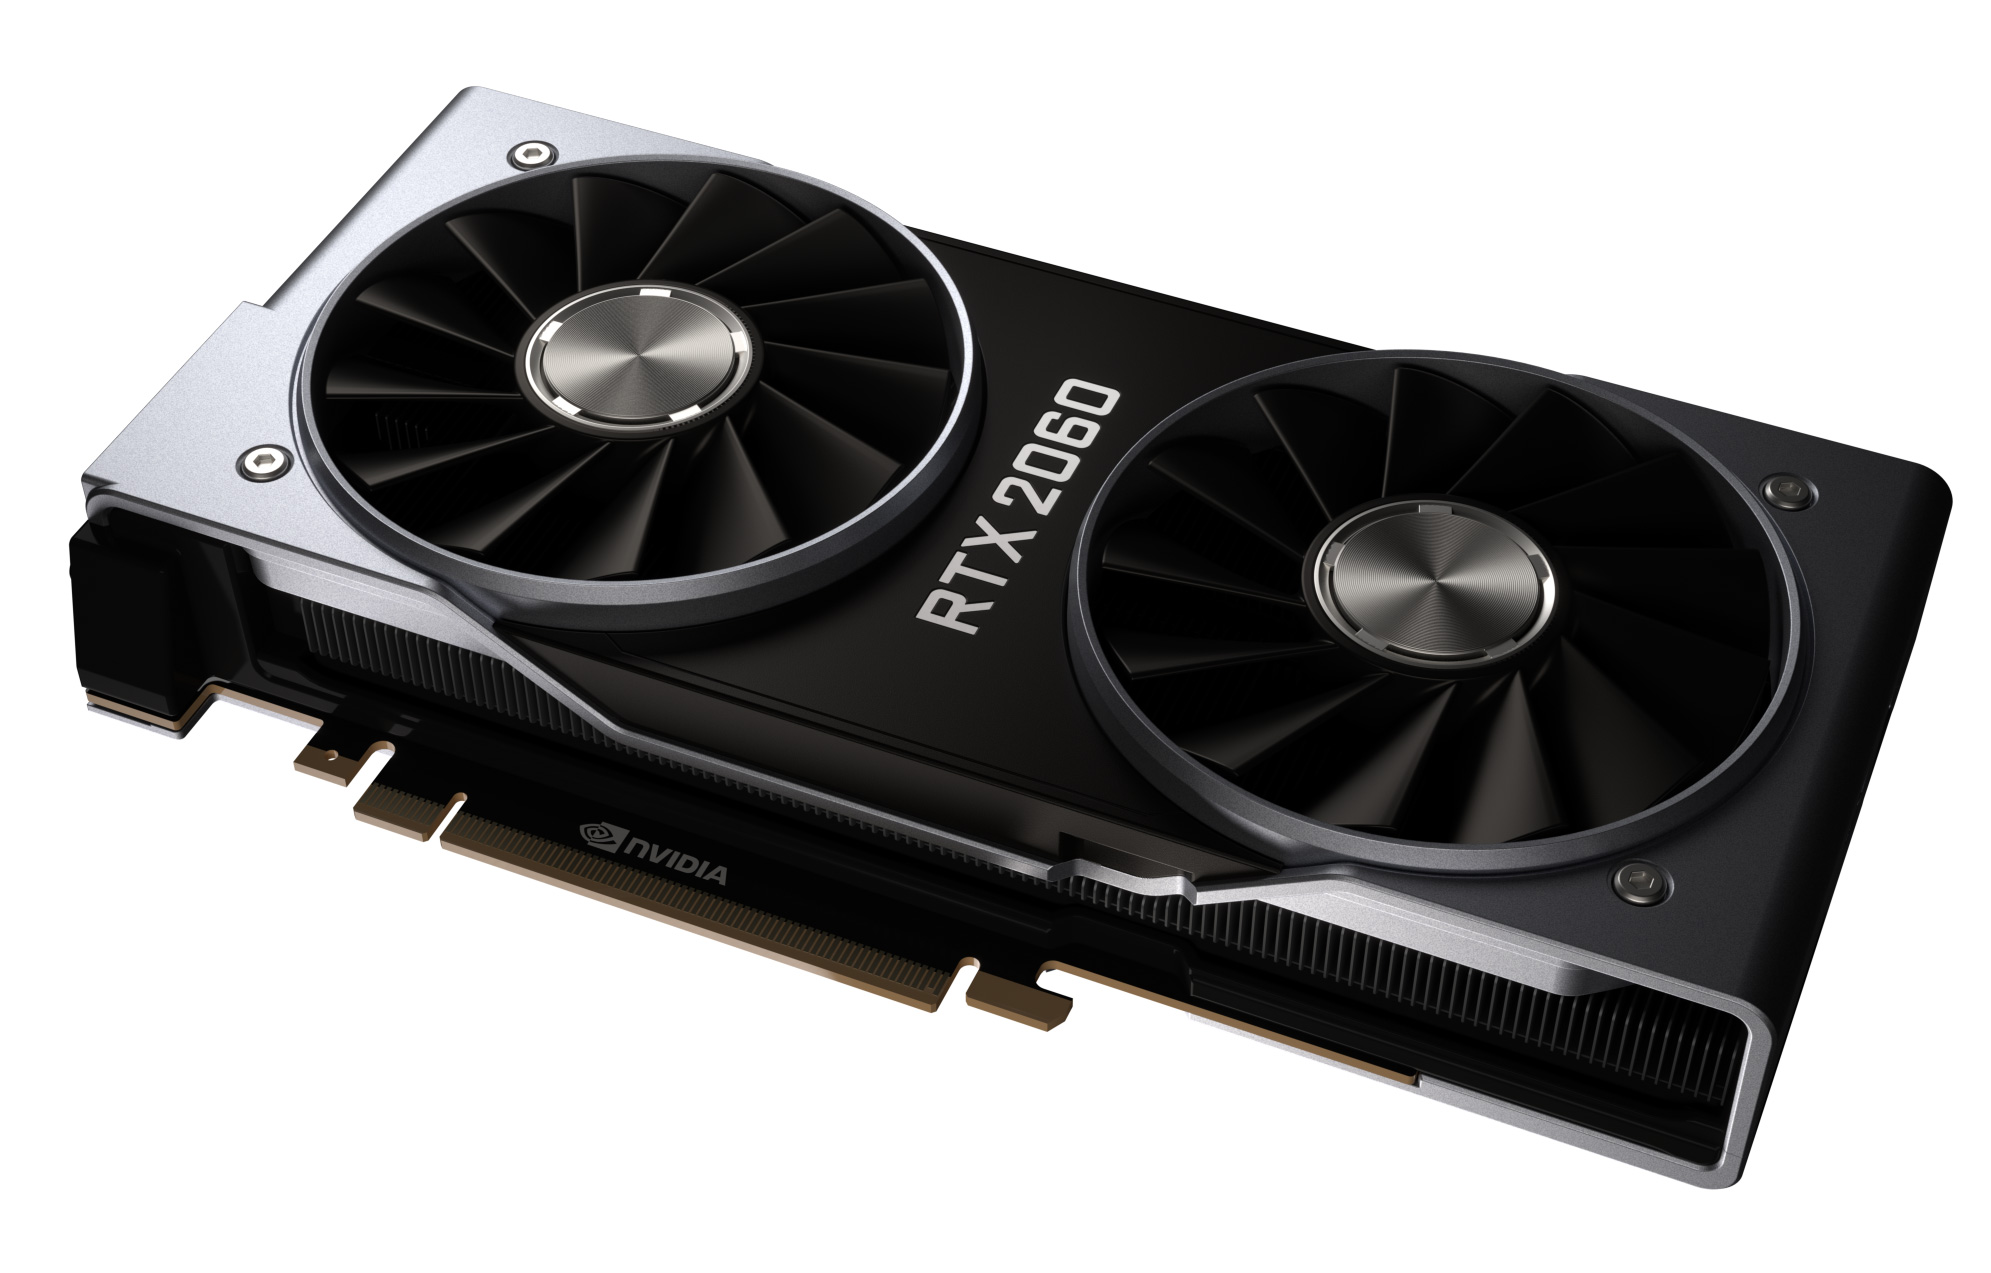 Closing Thoughts - The NVIDIA GeForce 